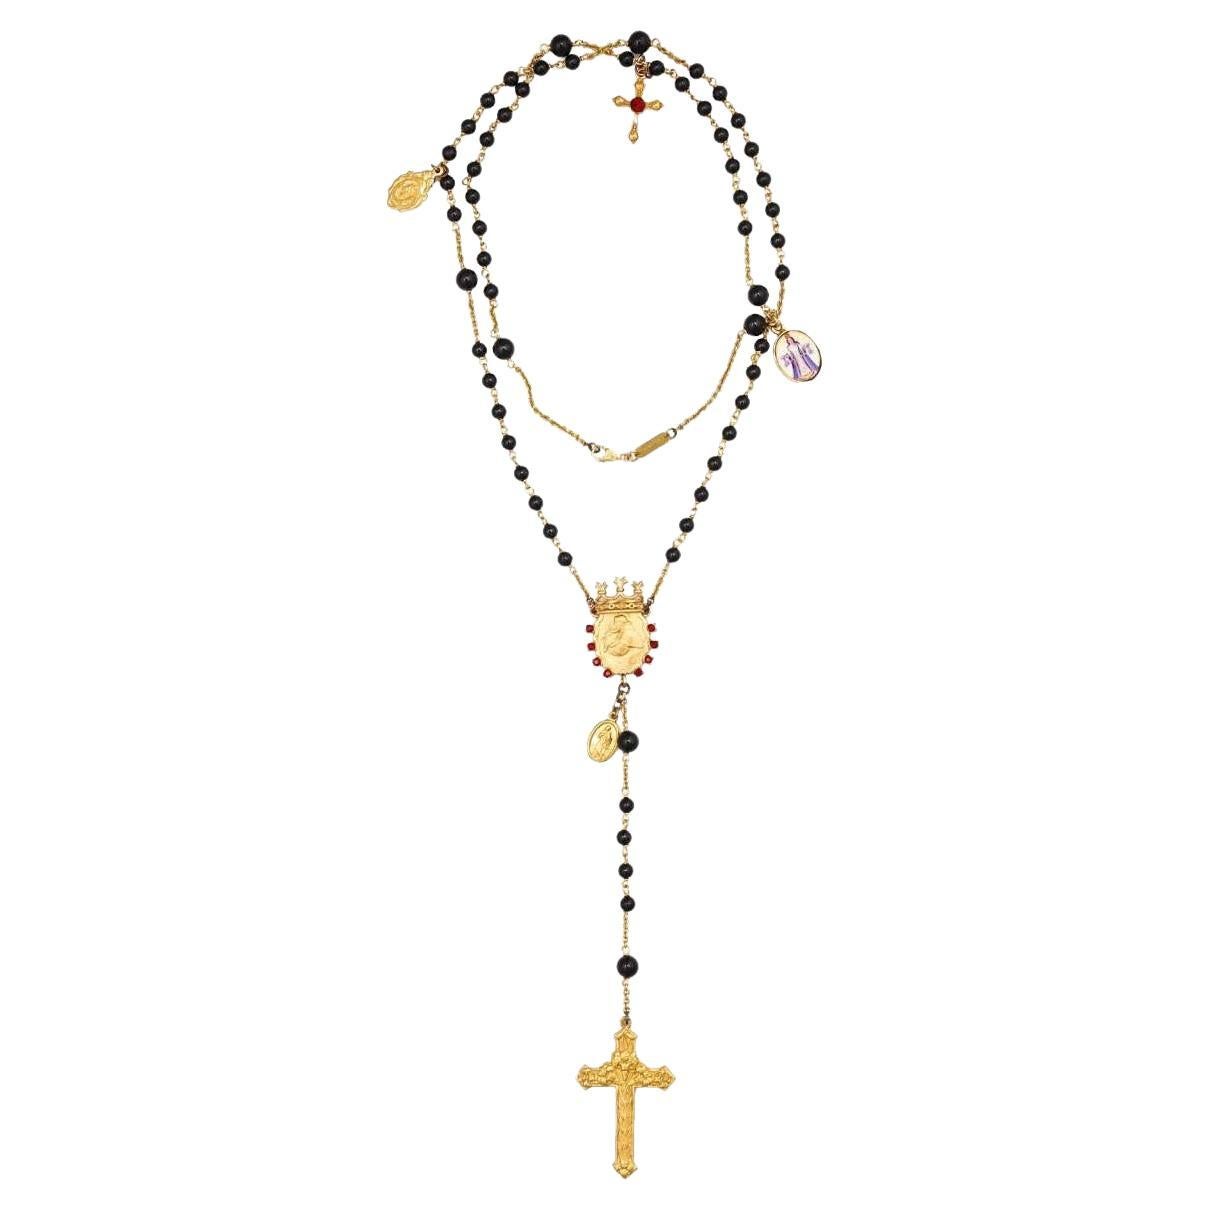 Dolce & Gabbana - Unisex Rosario Cross Crystal Crown Chain Necklace Gold Black